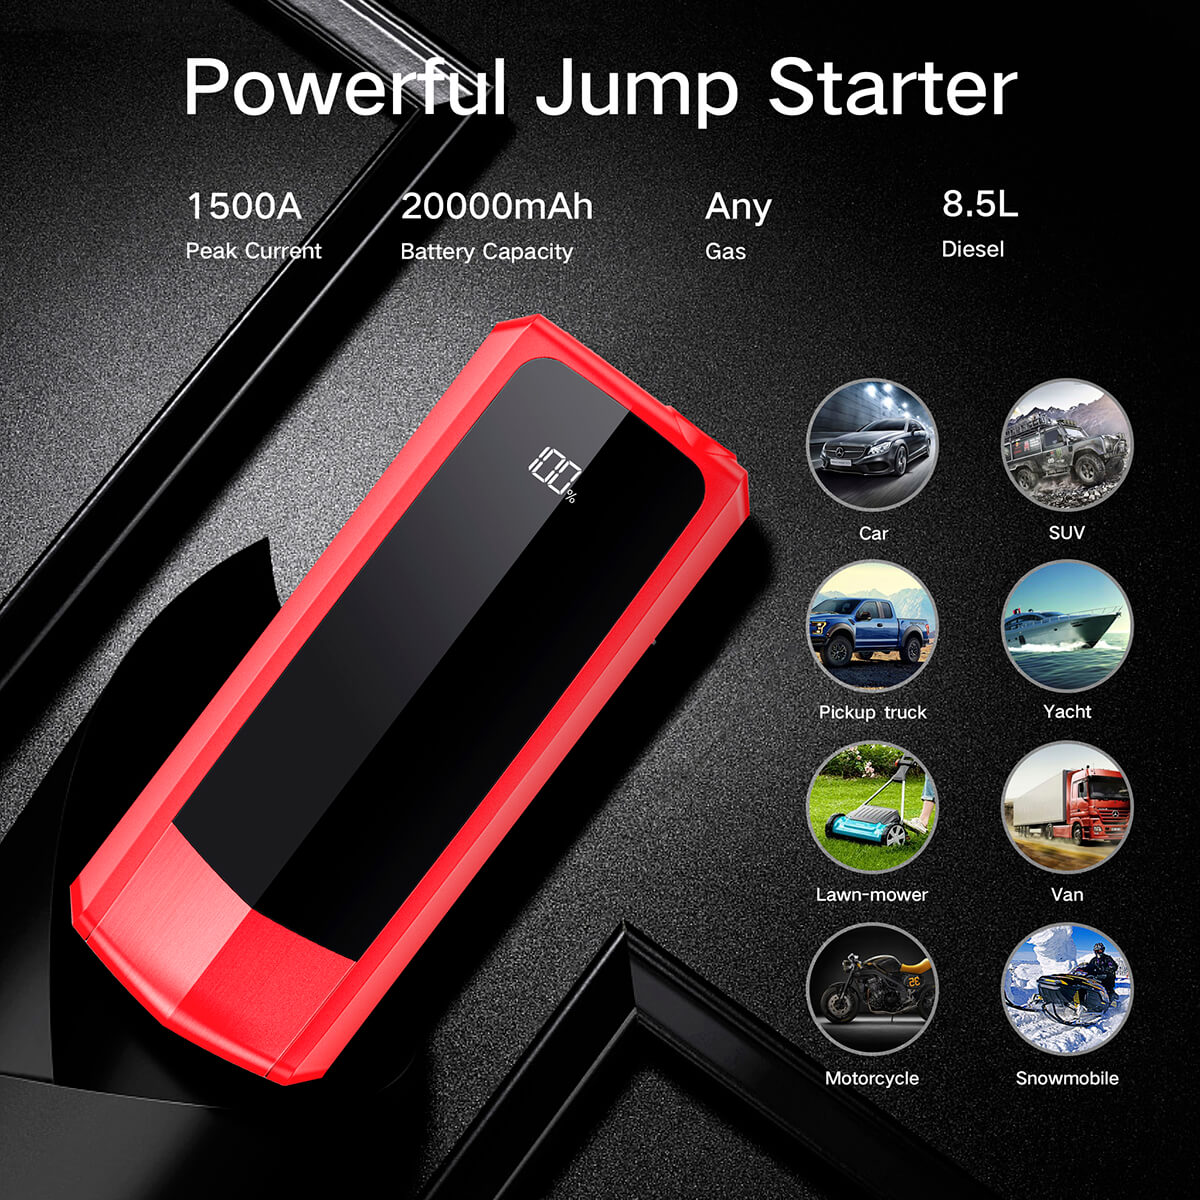 Audew 2000A Peak 20000mAh Car Jump Starter for All Gas Engines or Up To 8.5L Diesel Engines with LCD Power Display 